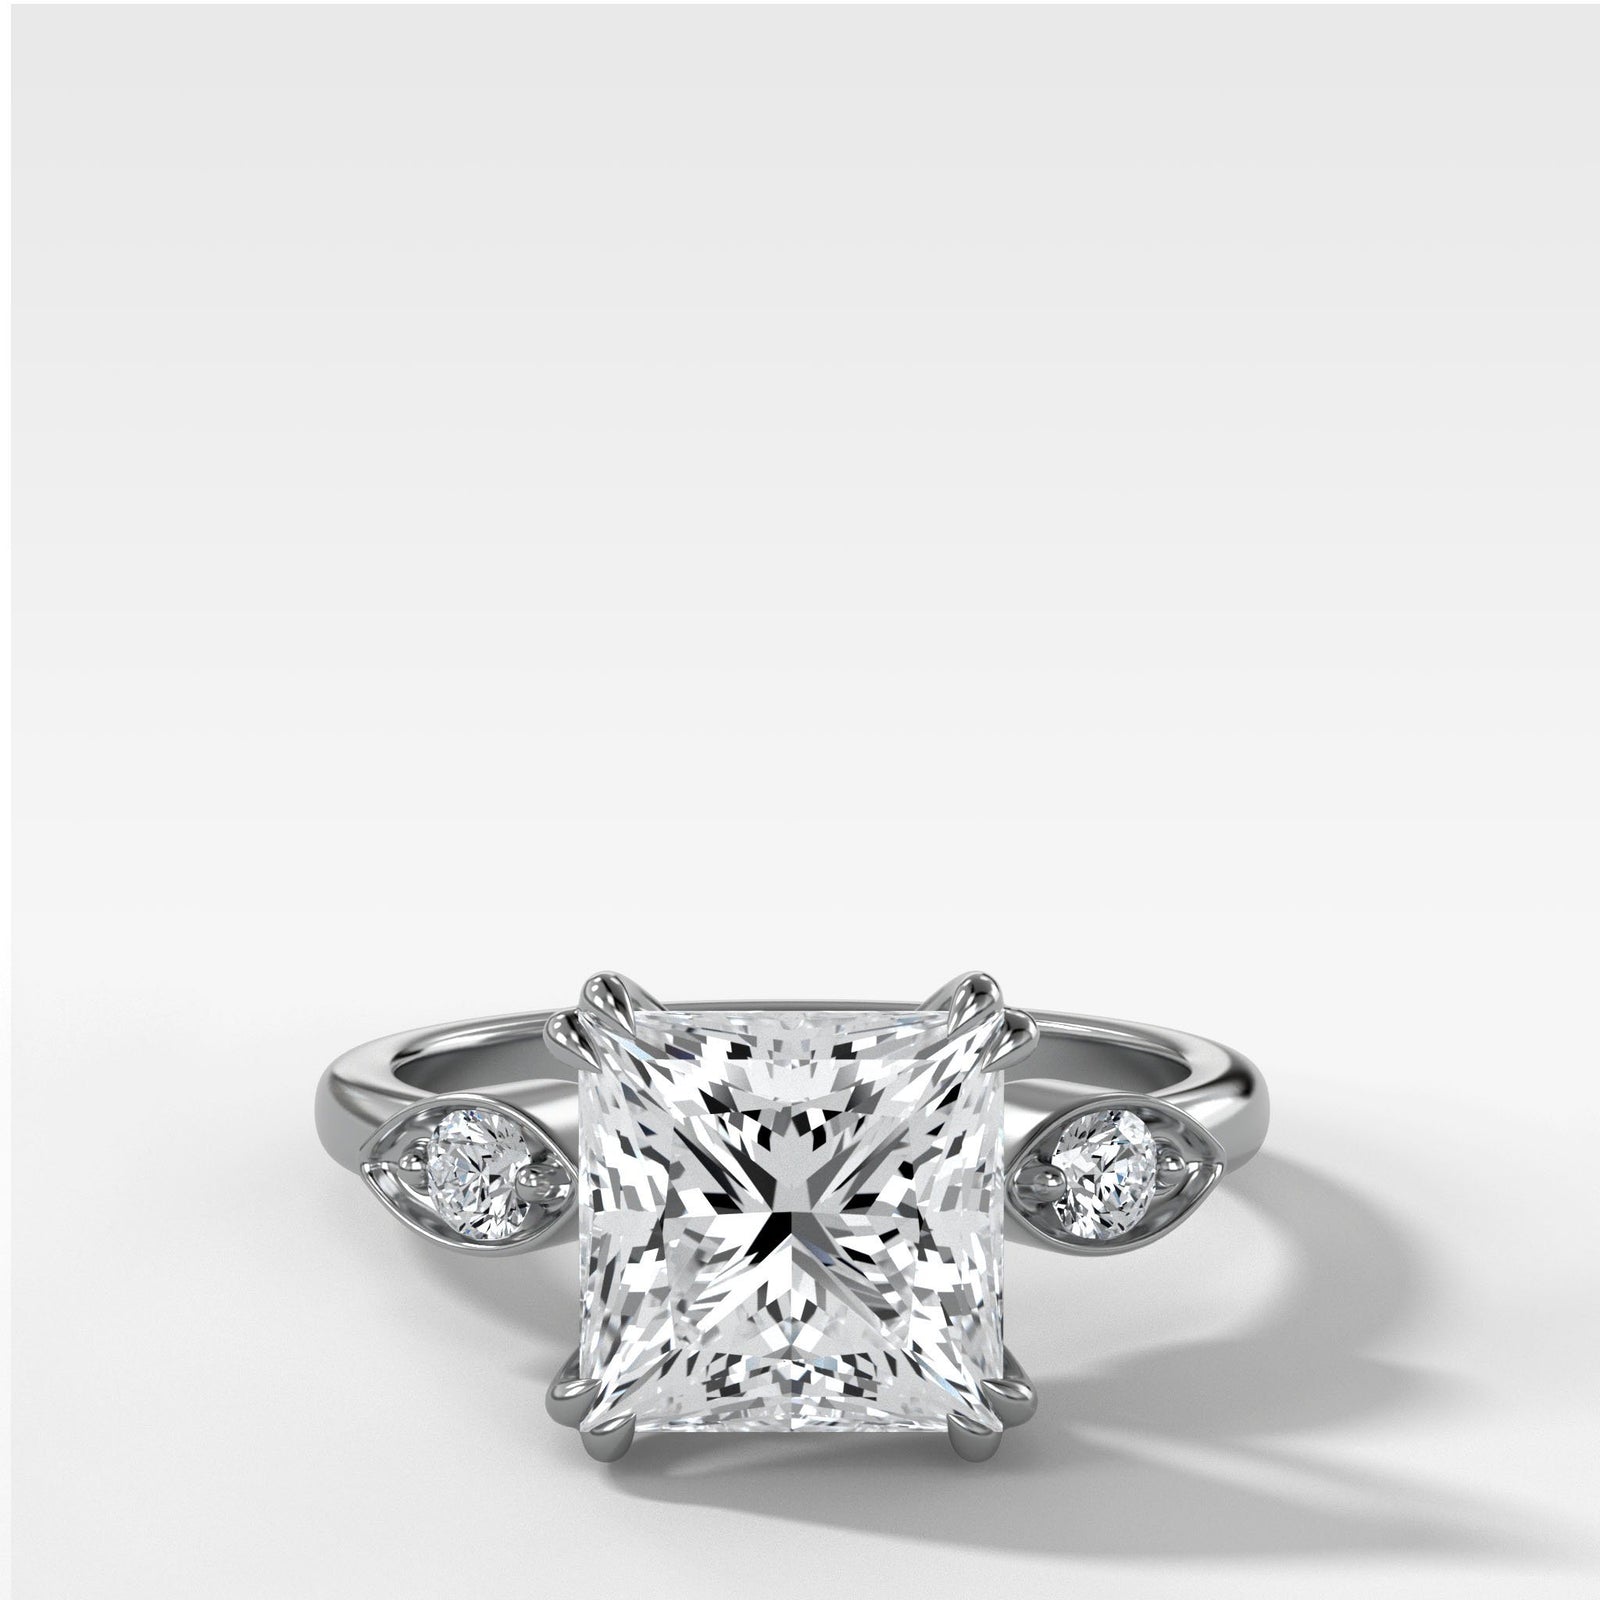 Buy quality Band ring in princess cut diamond with channel setting in Pune